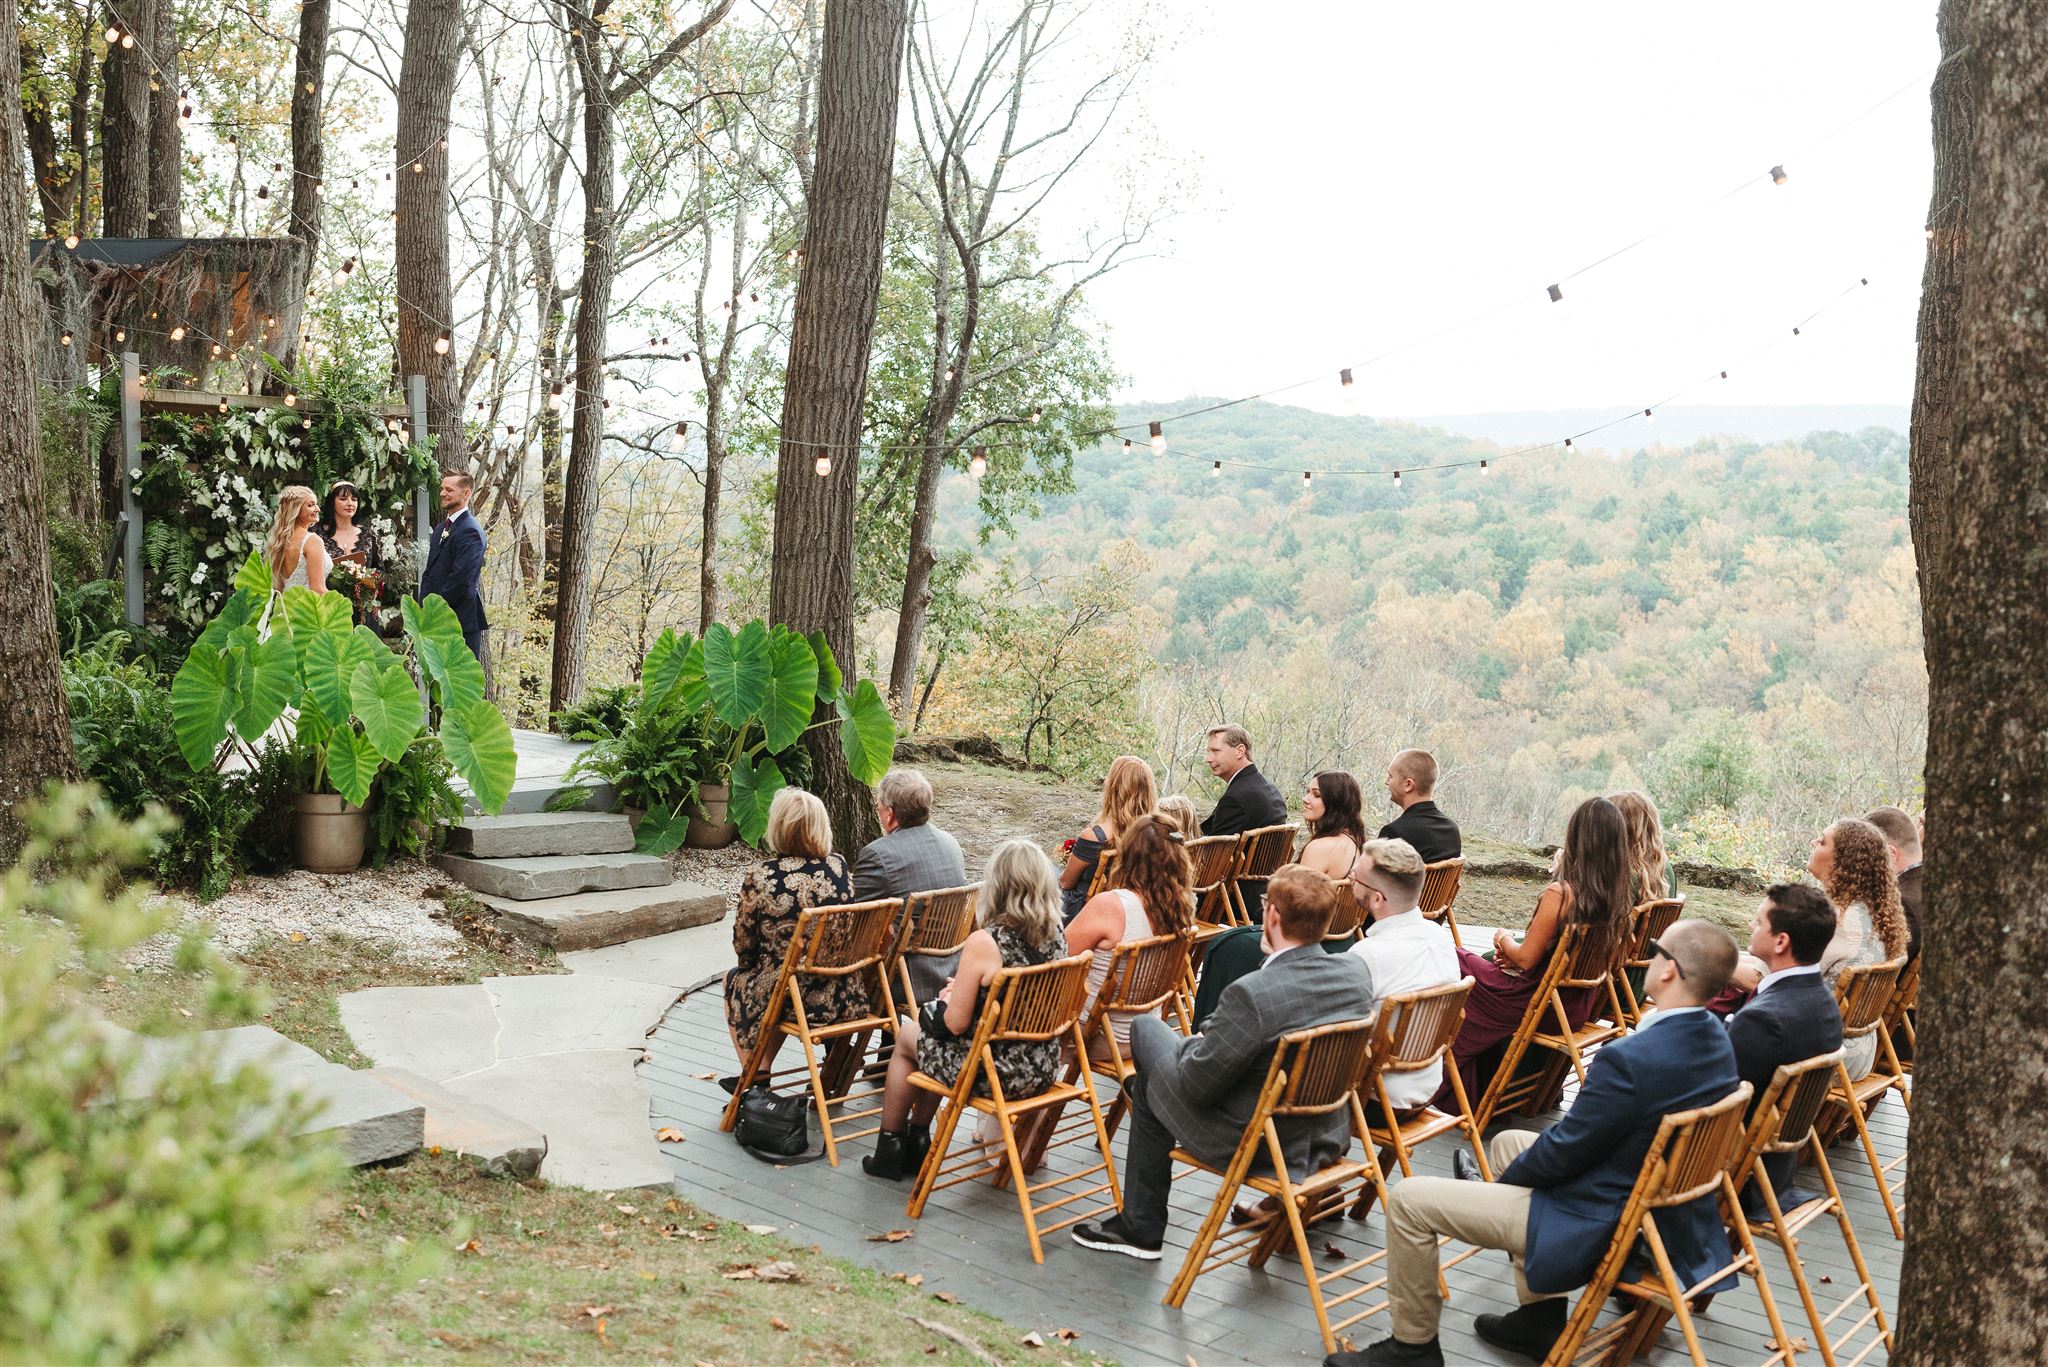 Shot for Sarah Brookhart - How to Elope in Philadelphia 2022: Outdoor wedding ceremony with bride and groom at the wedding arch and about 20 guests sitting and looking on